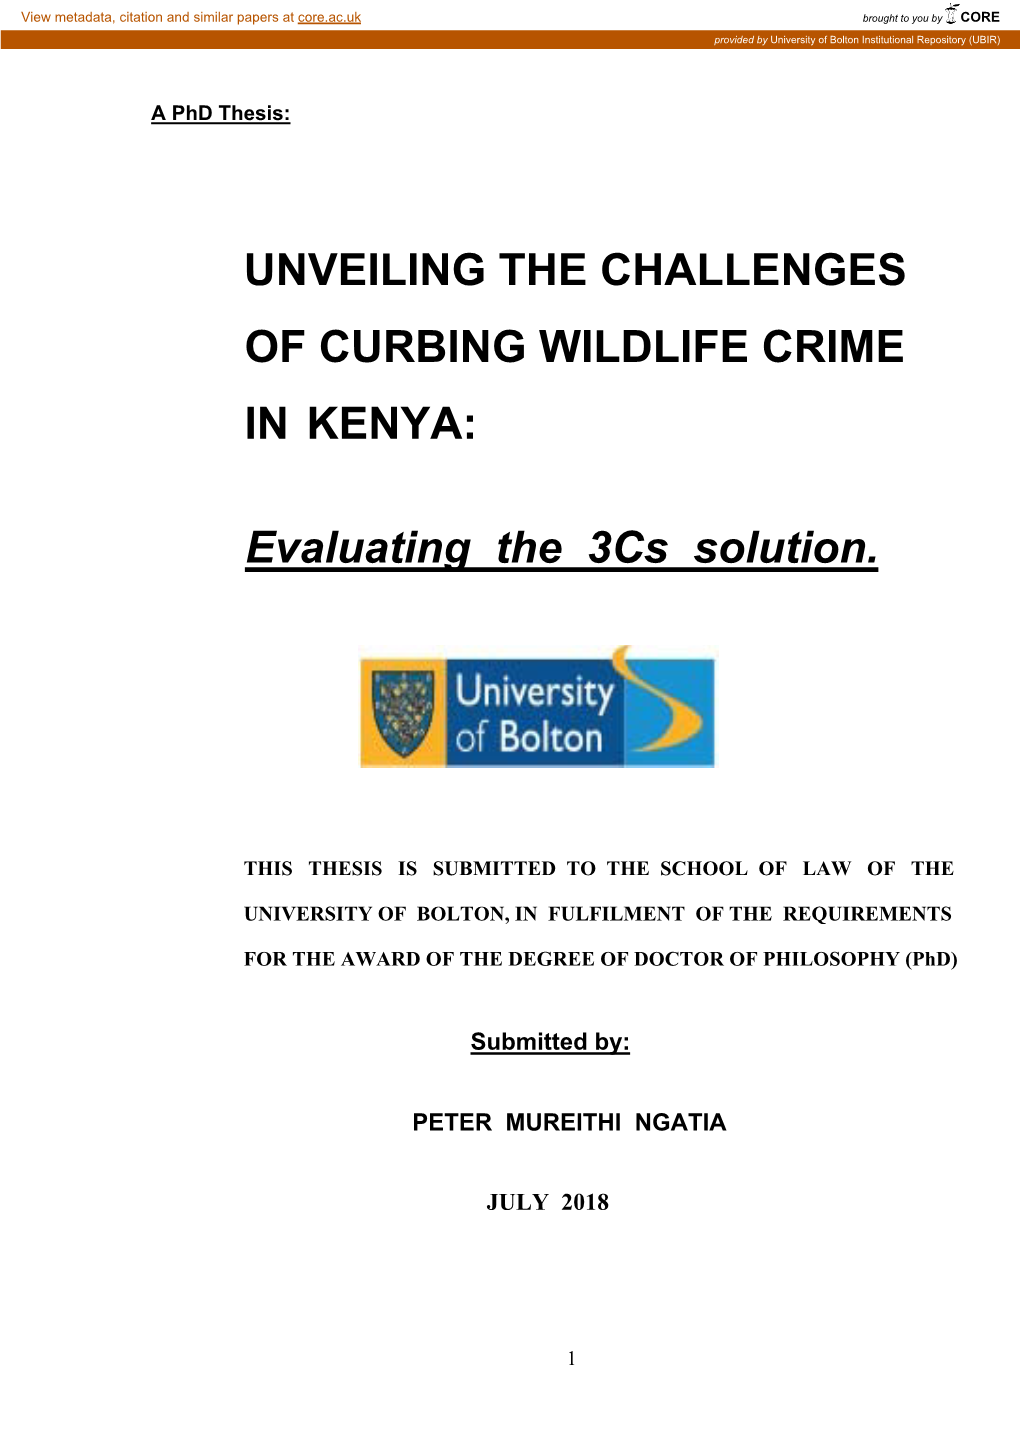 Unveiling the Challenges of Curbing Wildlife Crime In